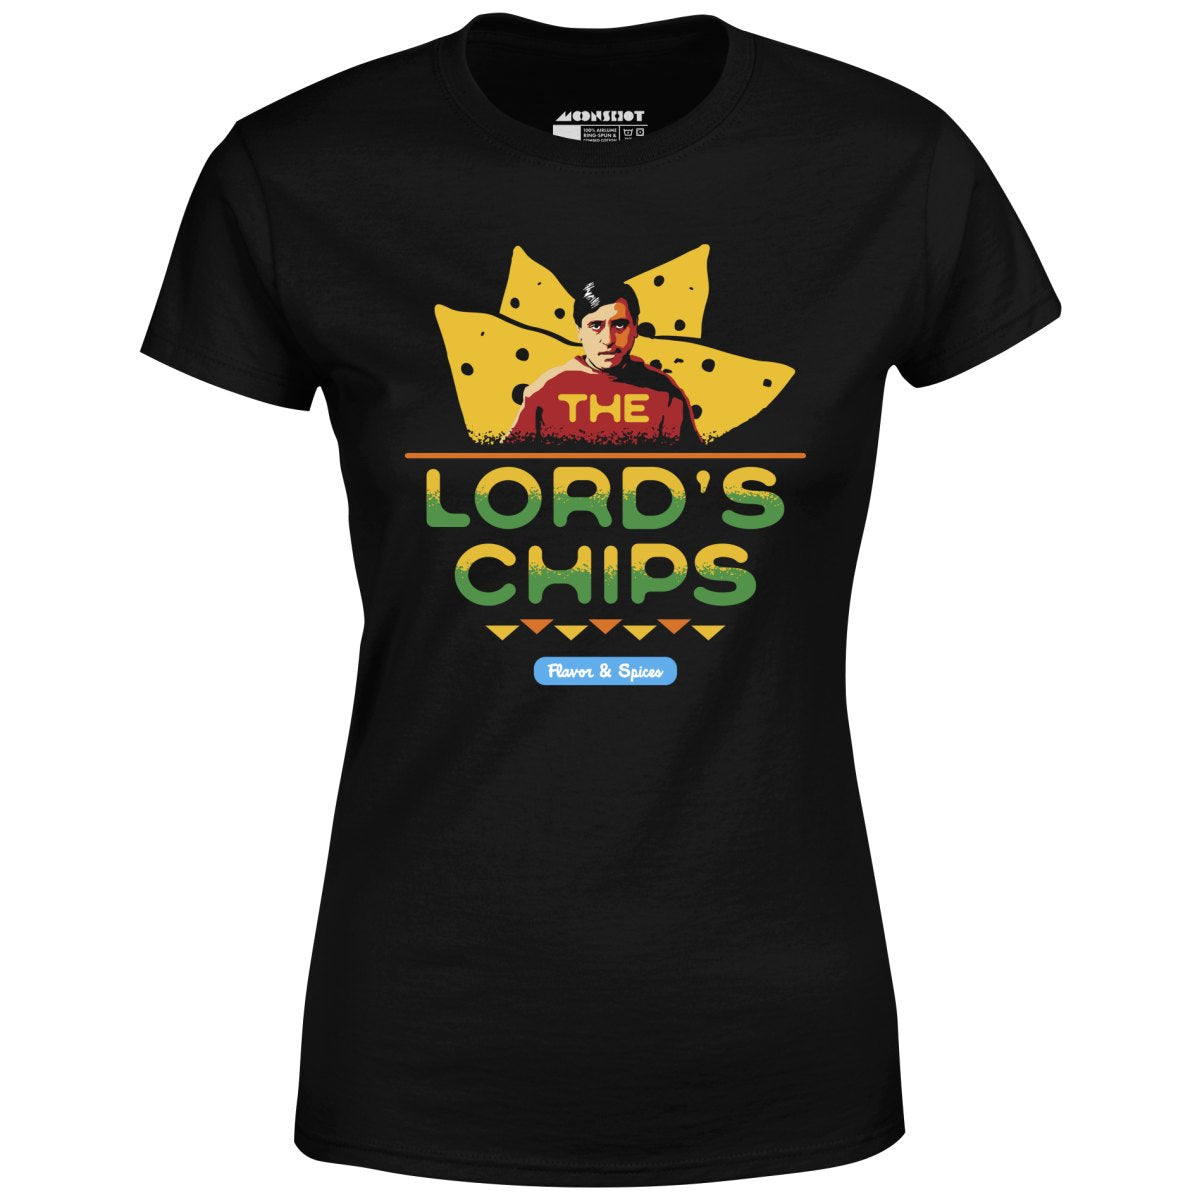 The Lord's Chips - Women's T-Shirt